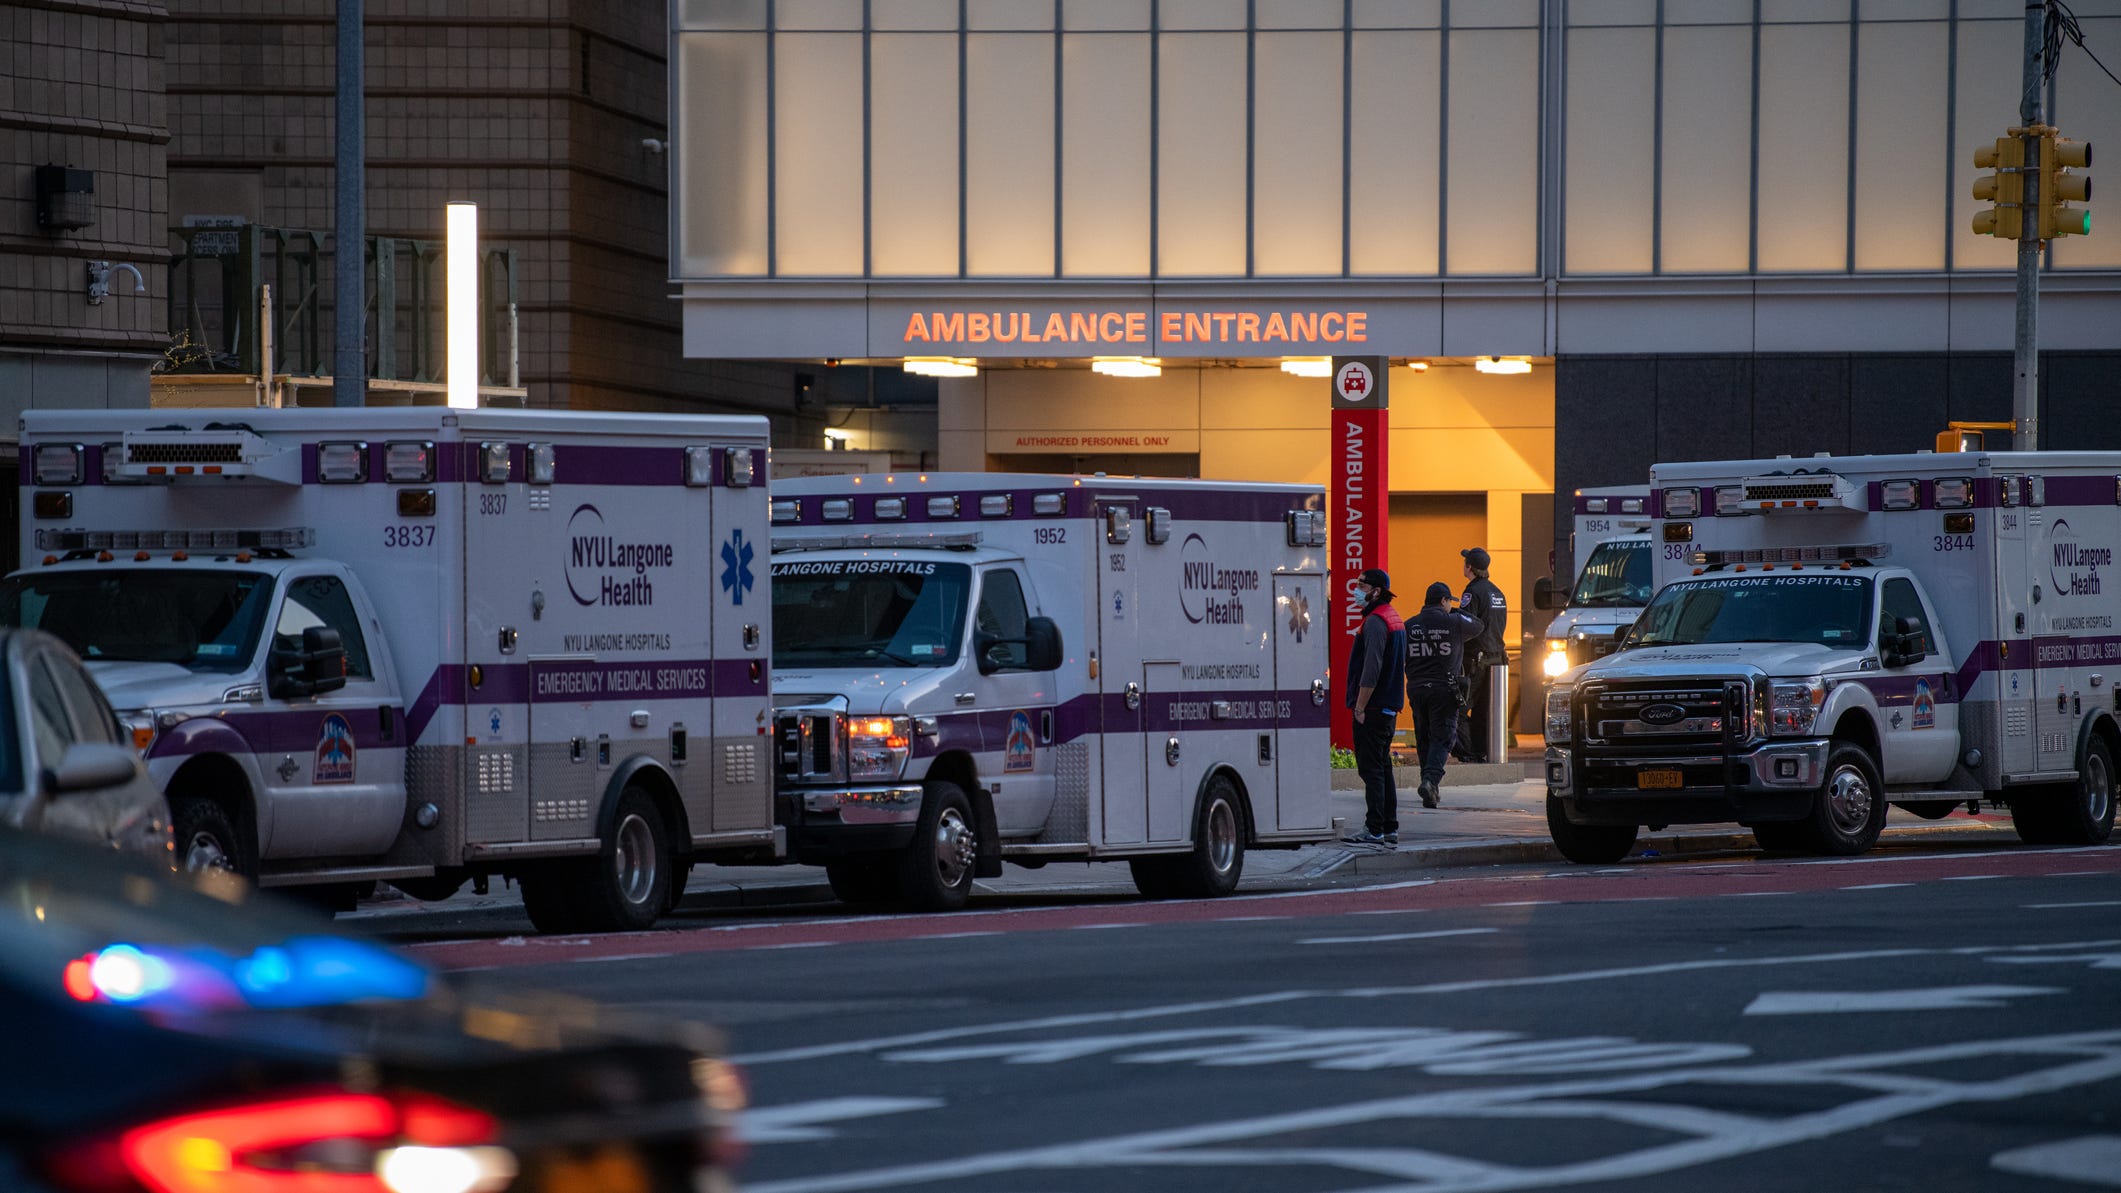 New York ends COVID-19 mask requirements in hospitals, health care facilities